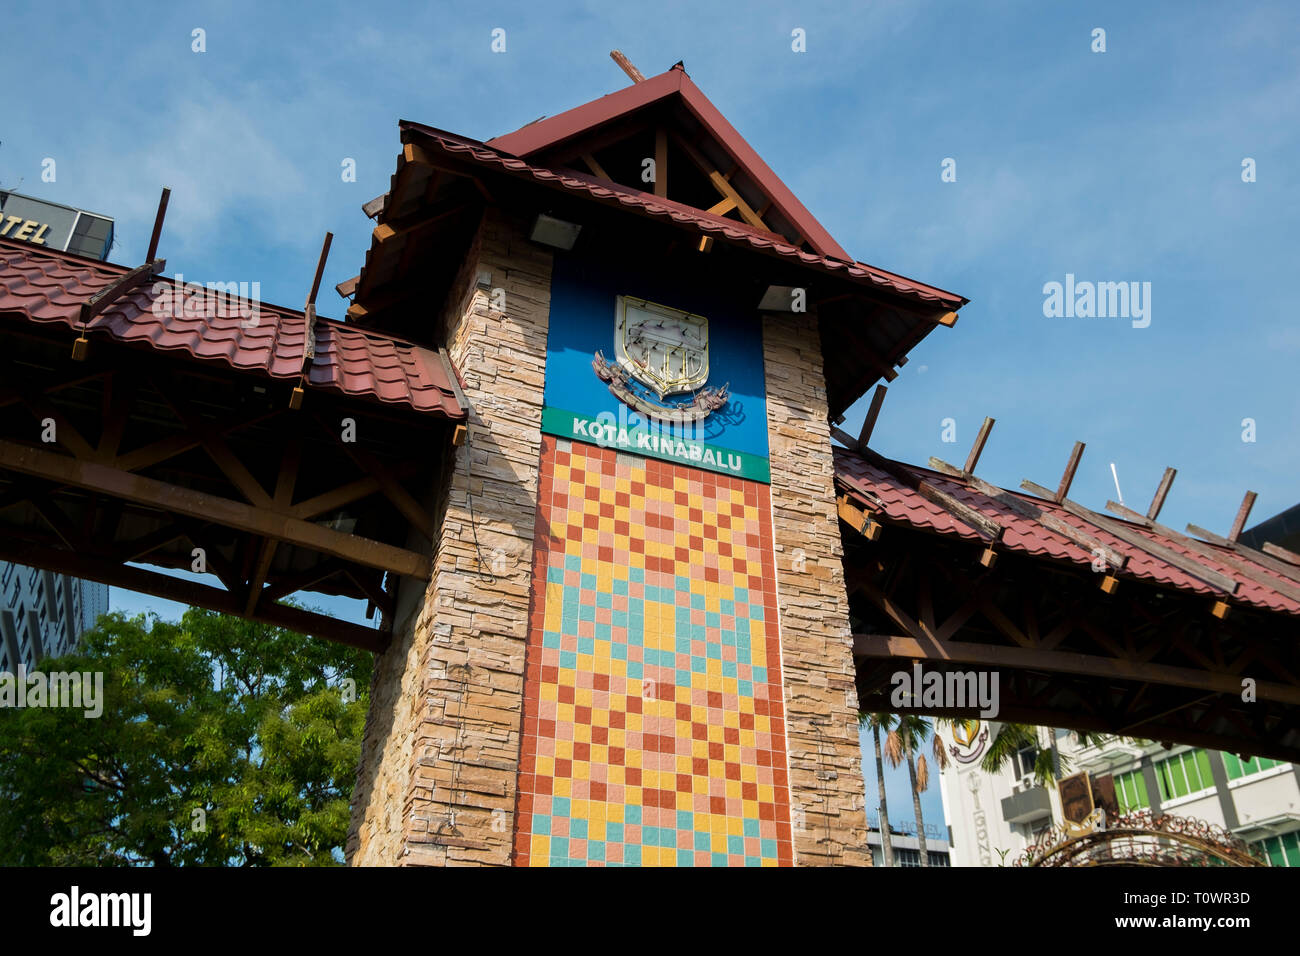 The gate to the city, decorated in traditional motifs, in Kota Kinabalu, Sabah, Borneo, Malaysia. Stock Photo